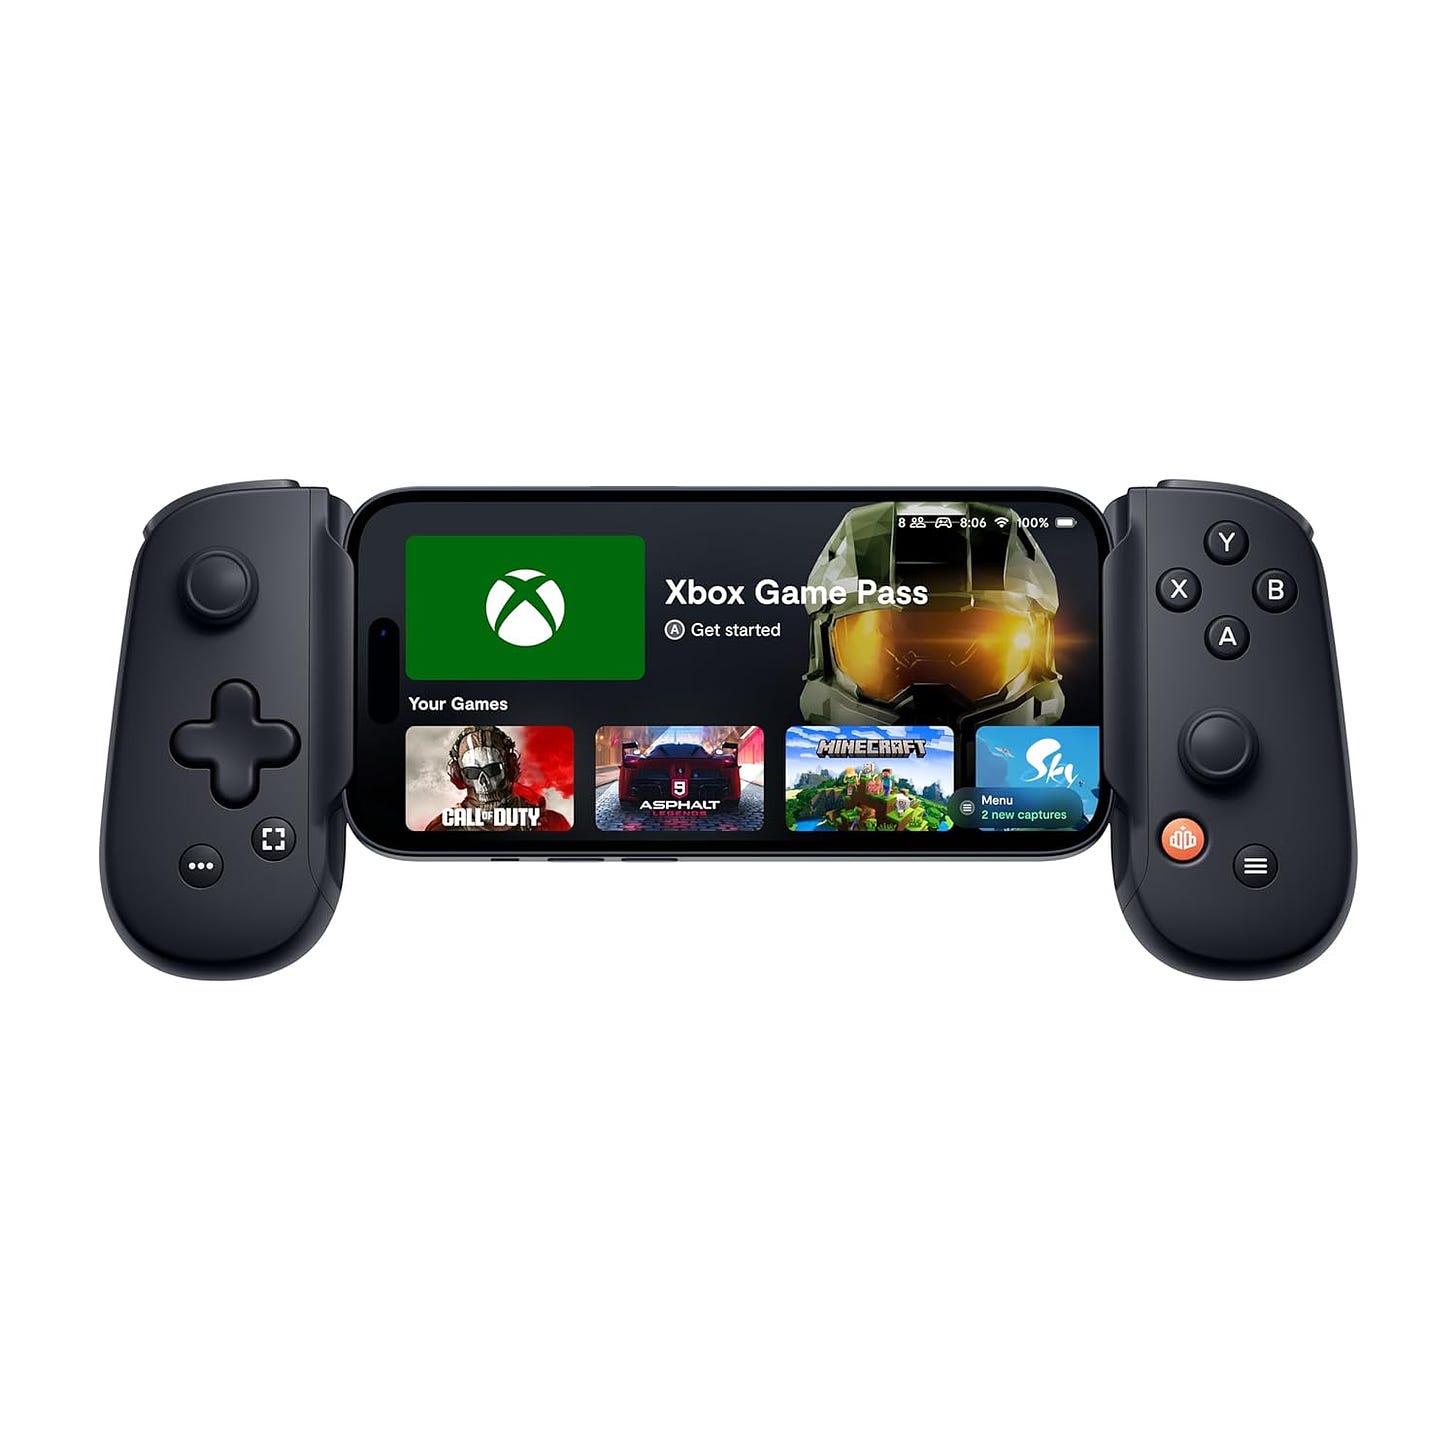 Official product image of the BackBone controller with an iPhone